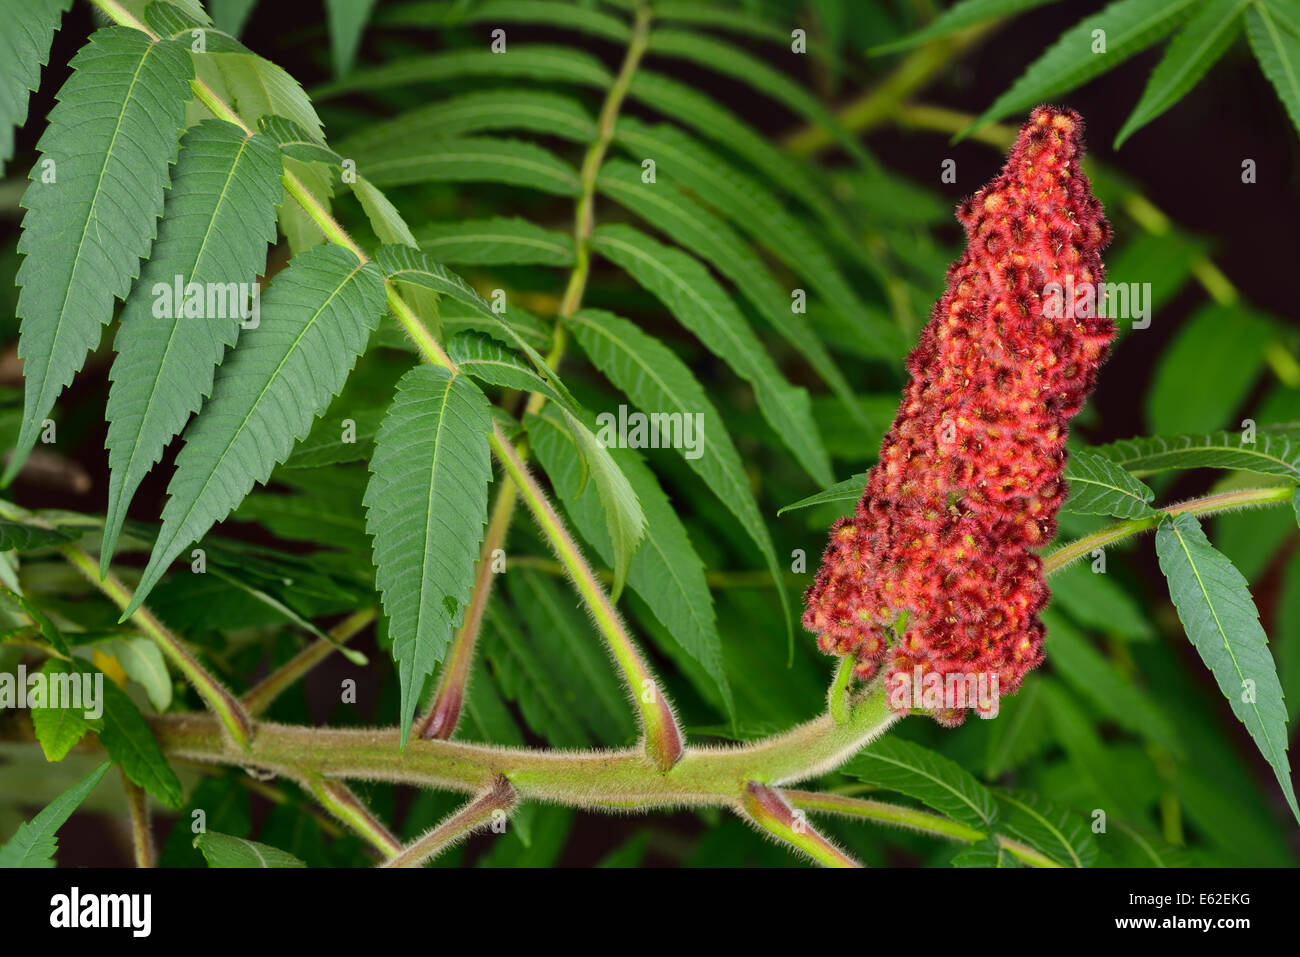 Close up of red drupe and fuzzy stem of a Staghorn Sumac with green compound leaves Stock Photo